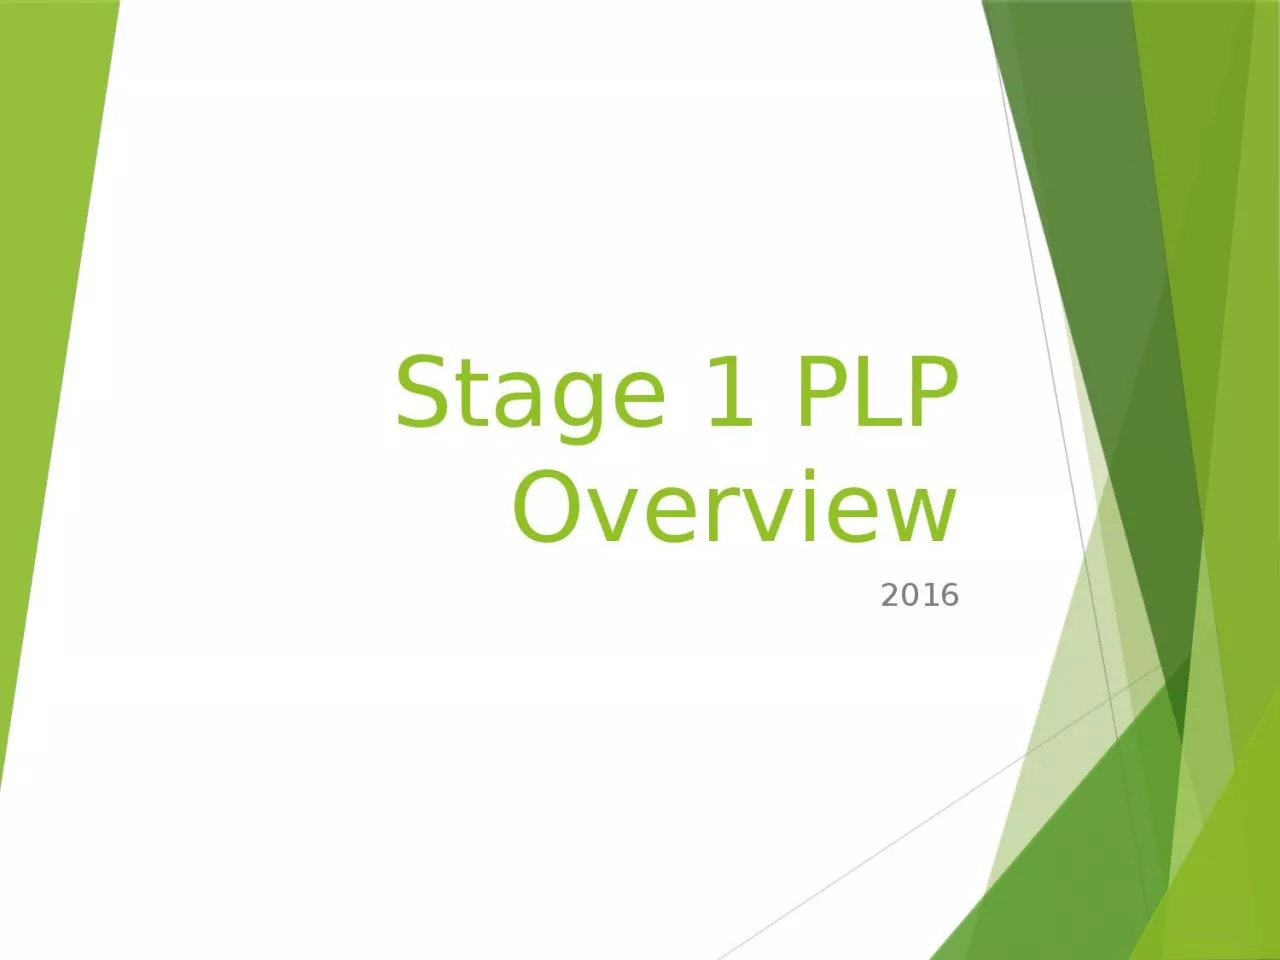 Stage 1 PLP Overview 2016